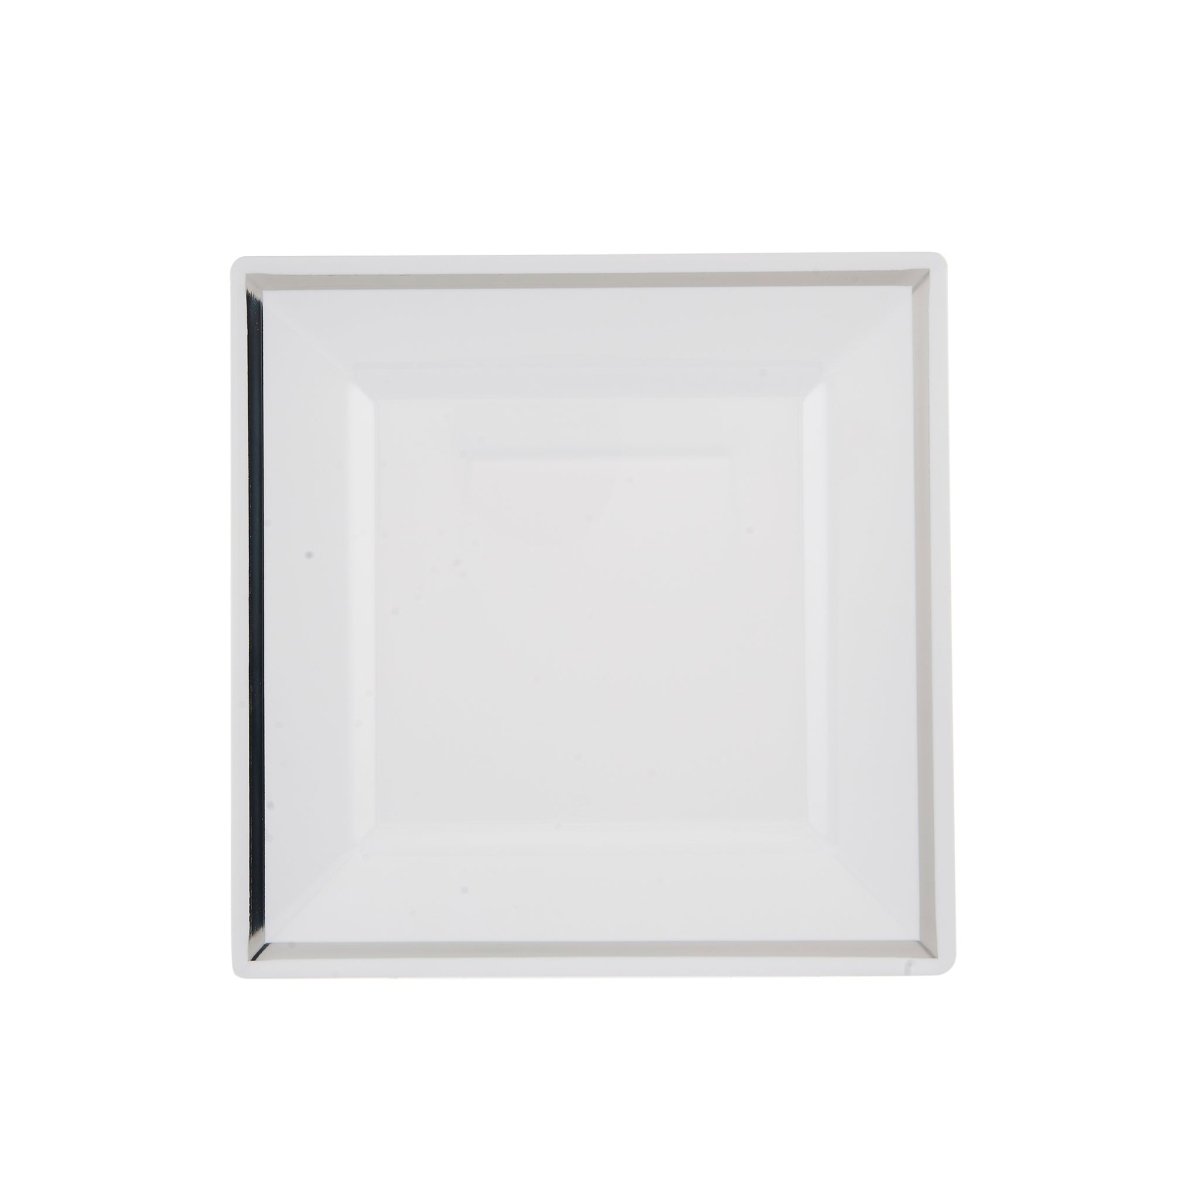 White Square Plate With Silver Rim Design 10 Pieces - hotpackwebstore.com - 